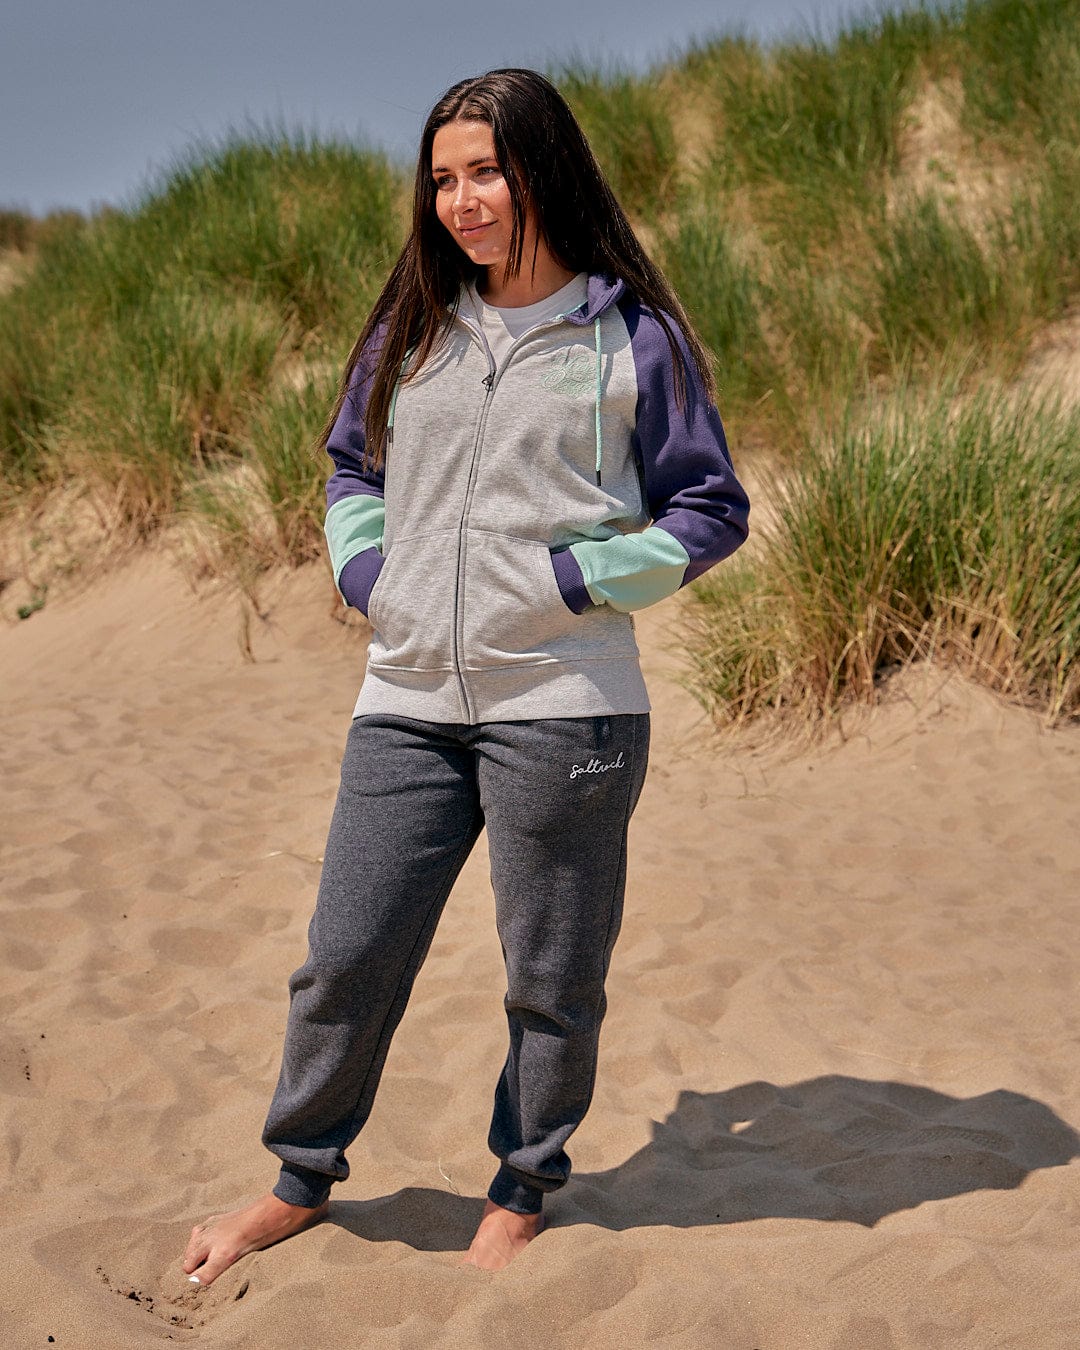 A girl standing in the sand wearing a Saltrock Jan - Womens Zip Hoodie - Light Grey and sweatpants.